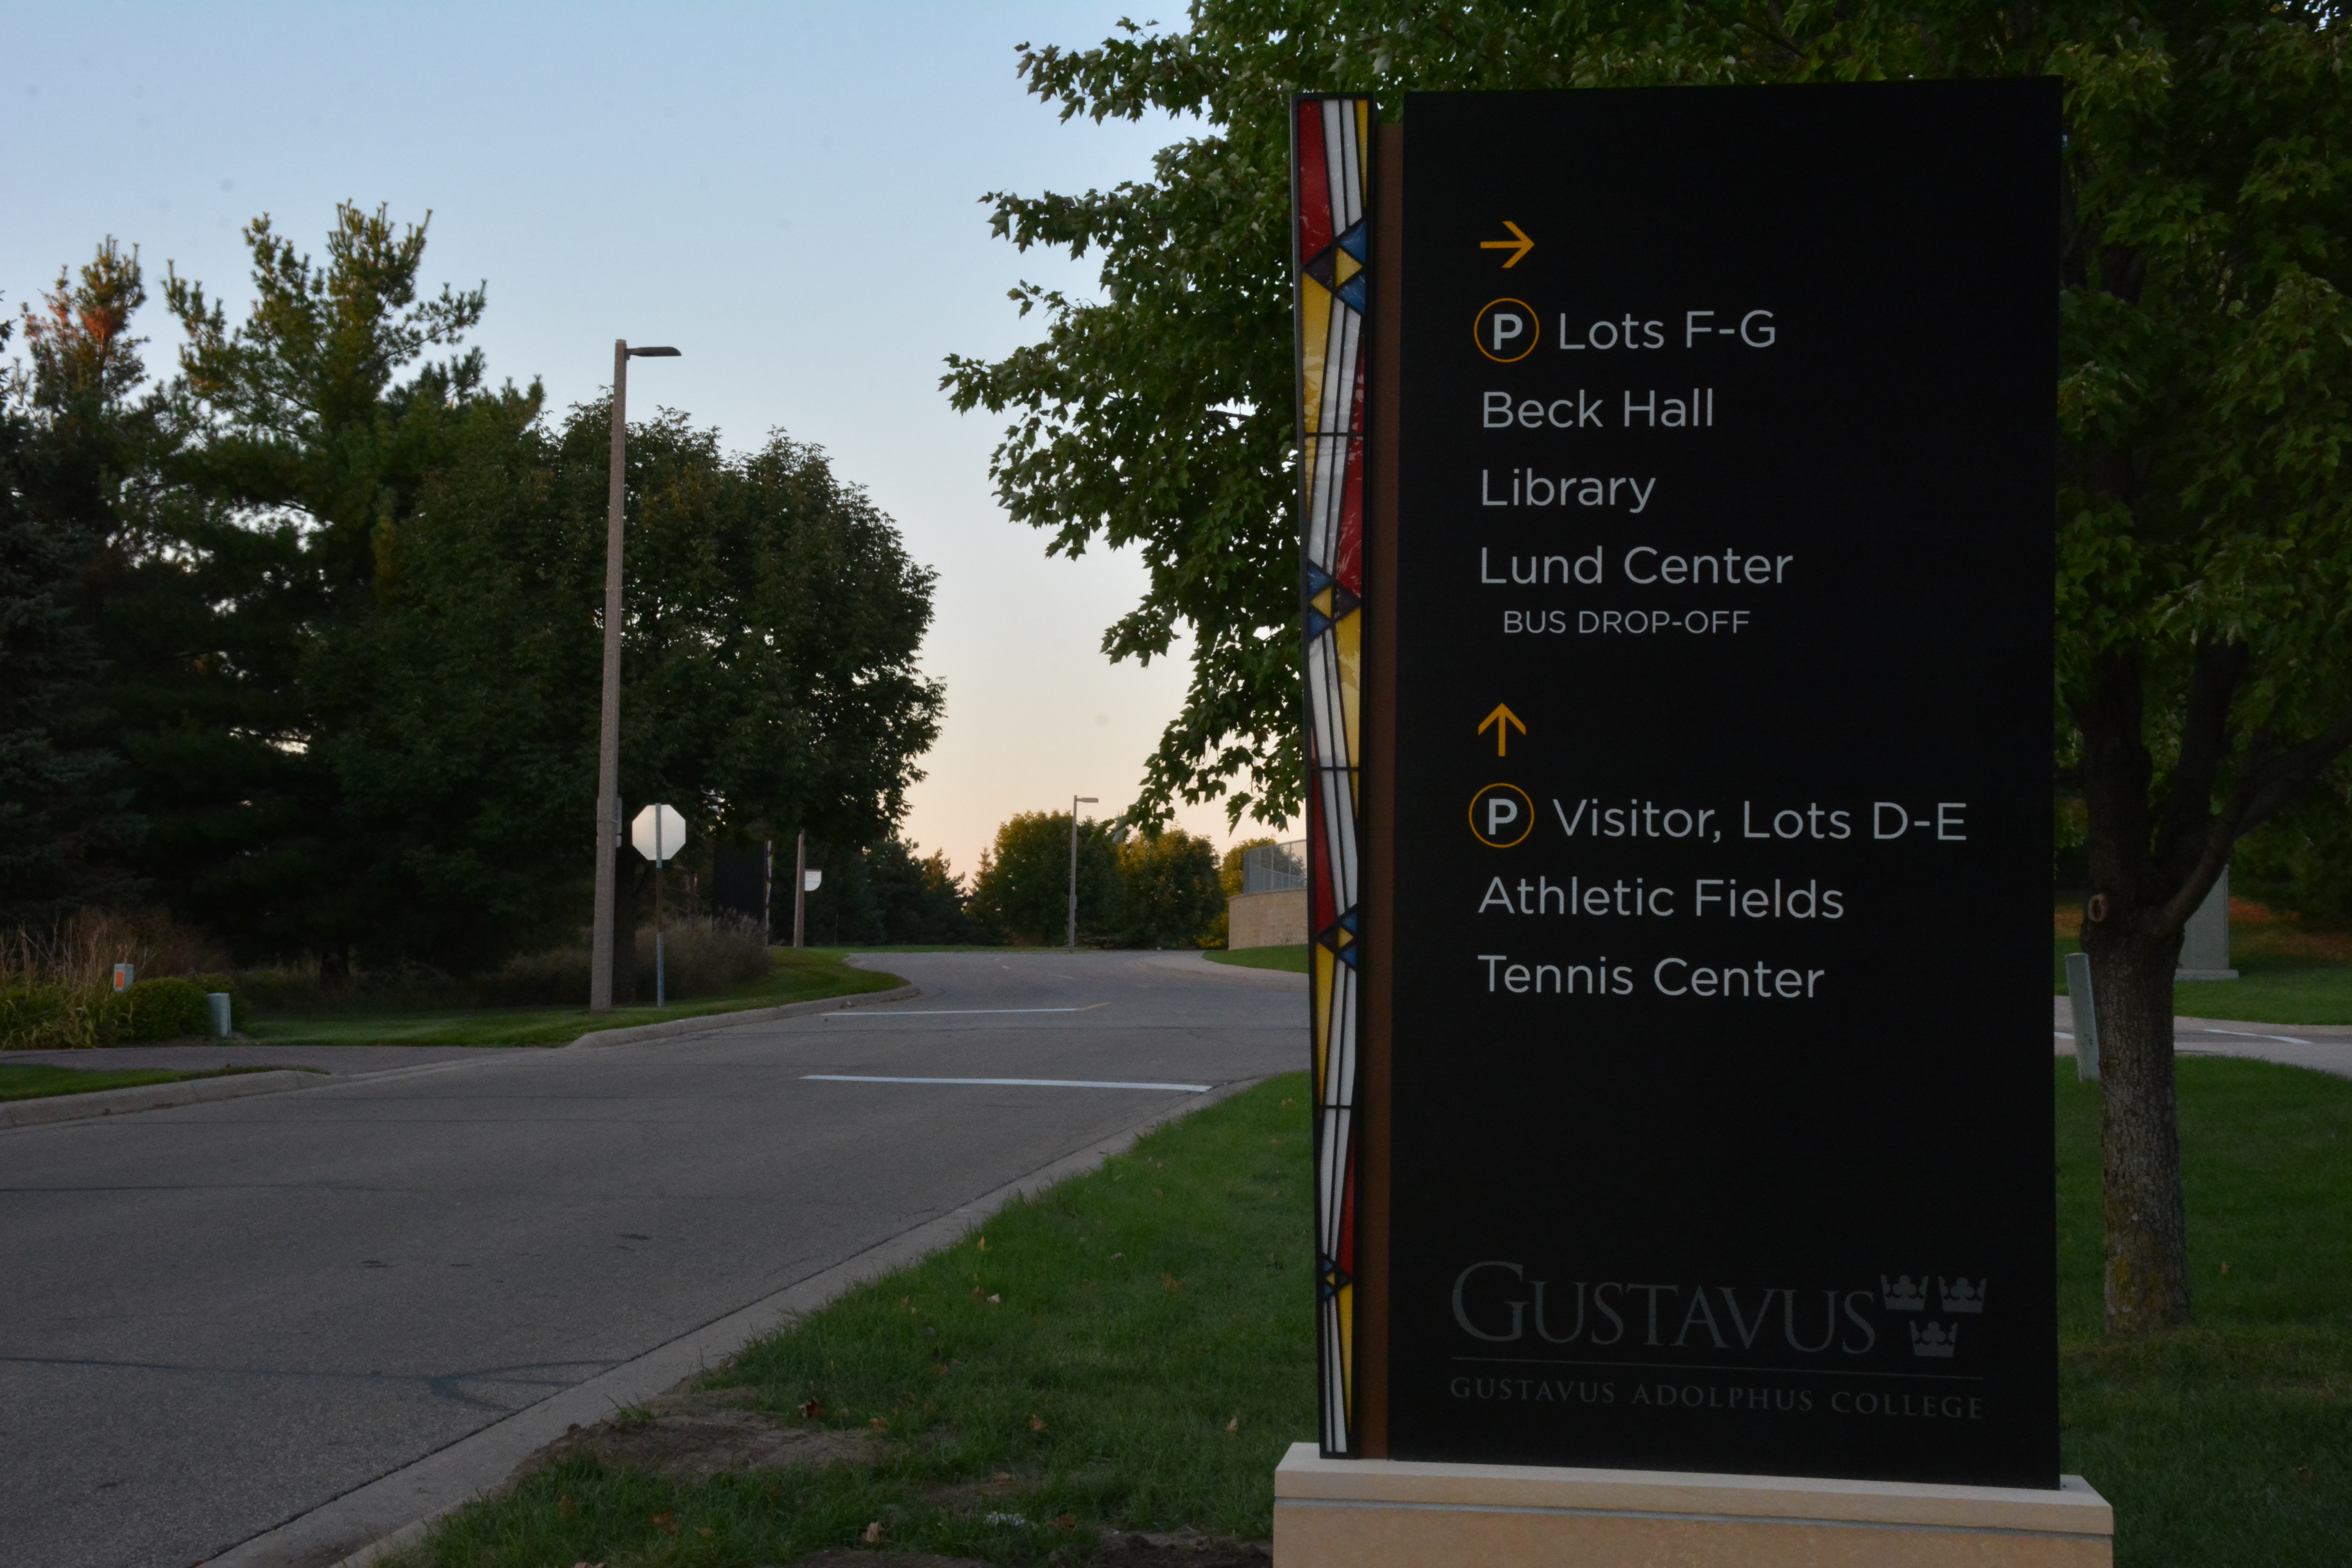 The new wayfinding signs, as pictured, can be found throughout campus.